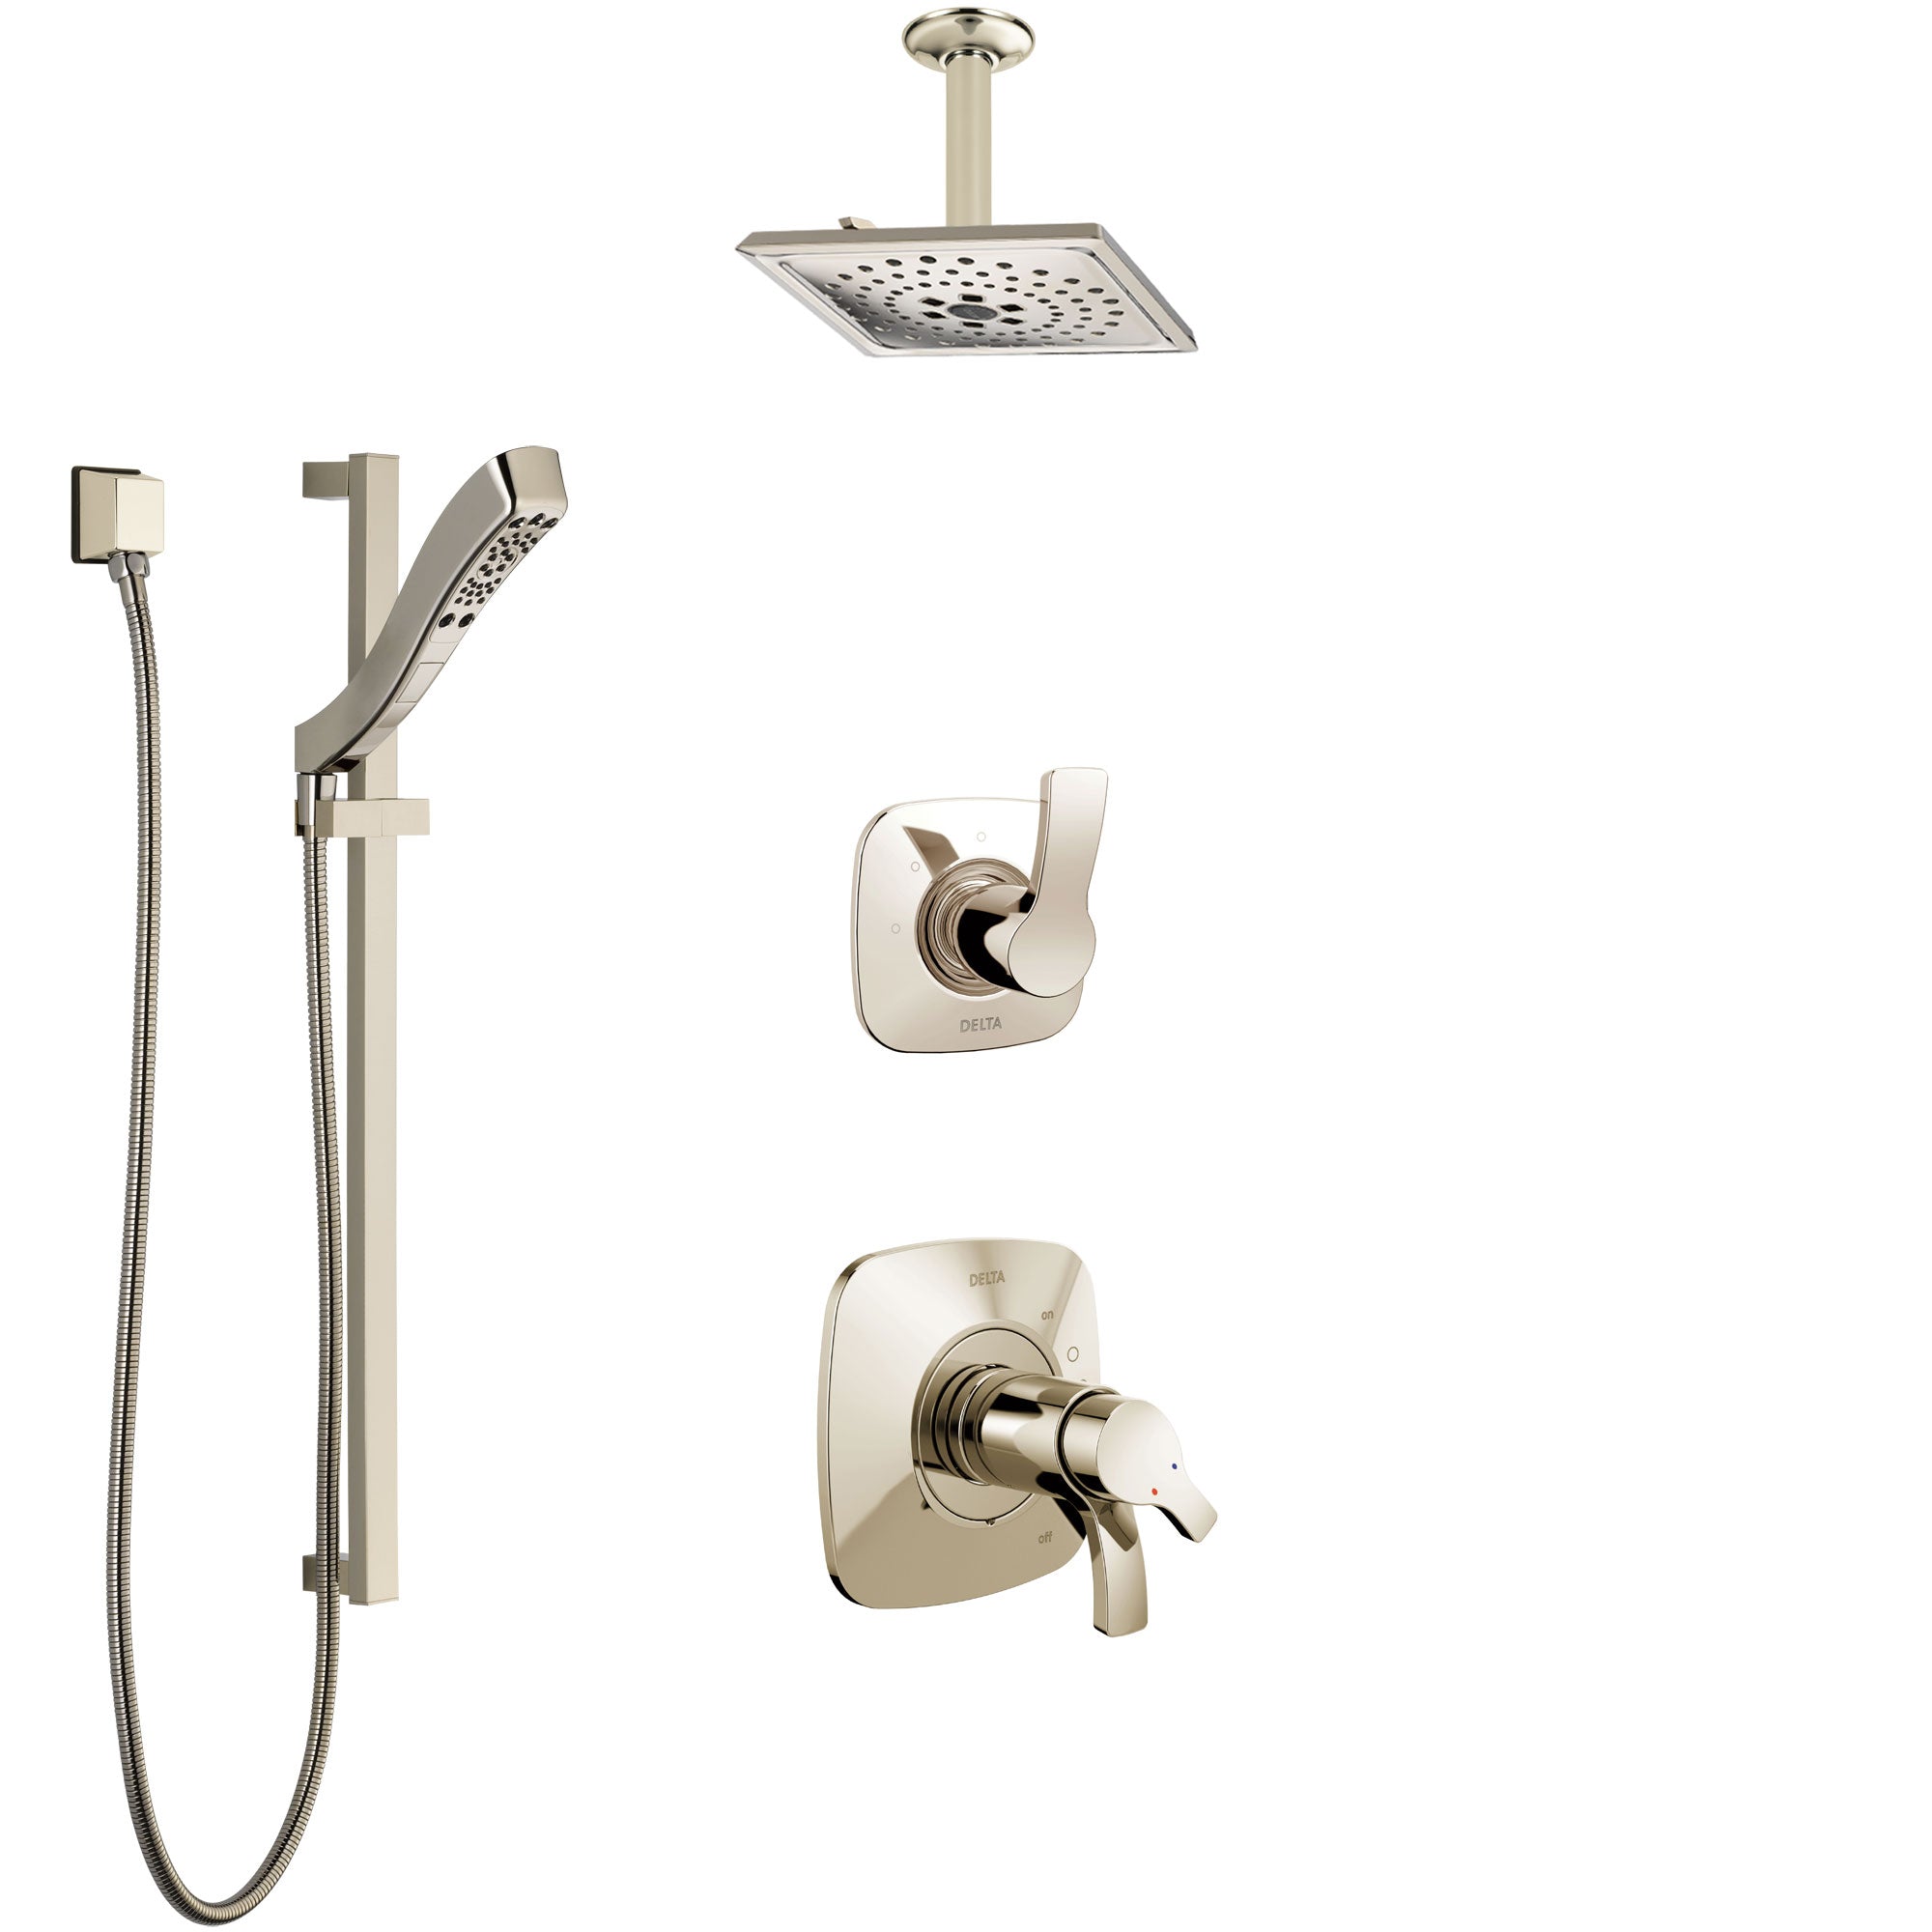 Delta Tesla Polished Nickel Shower System with Dual Thermostatic Control Handle, Diverter, Ceiling Mount Showerhead, and Hand Shower SS17T522PN1